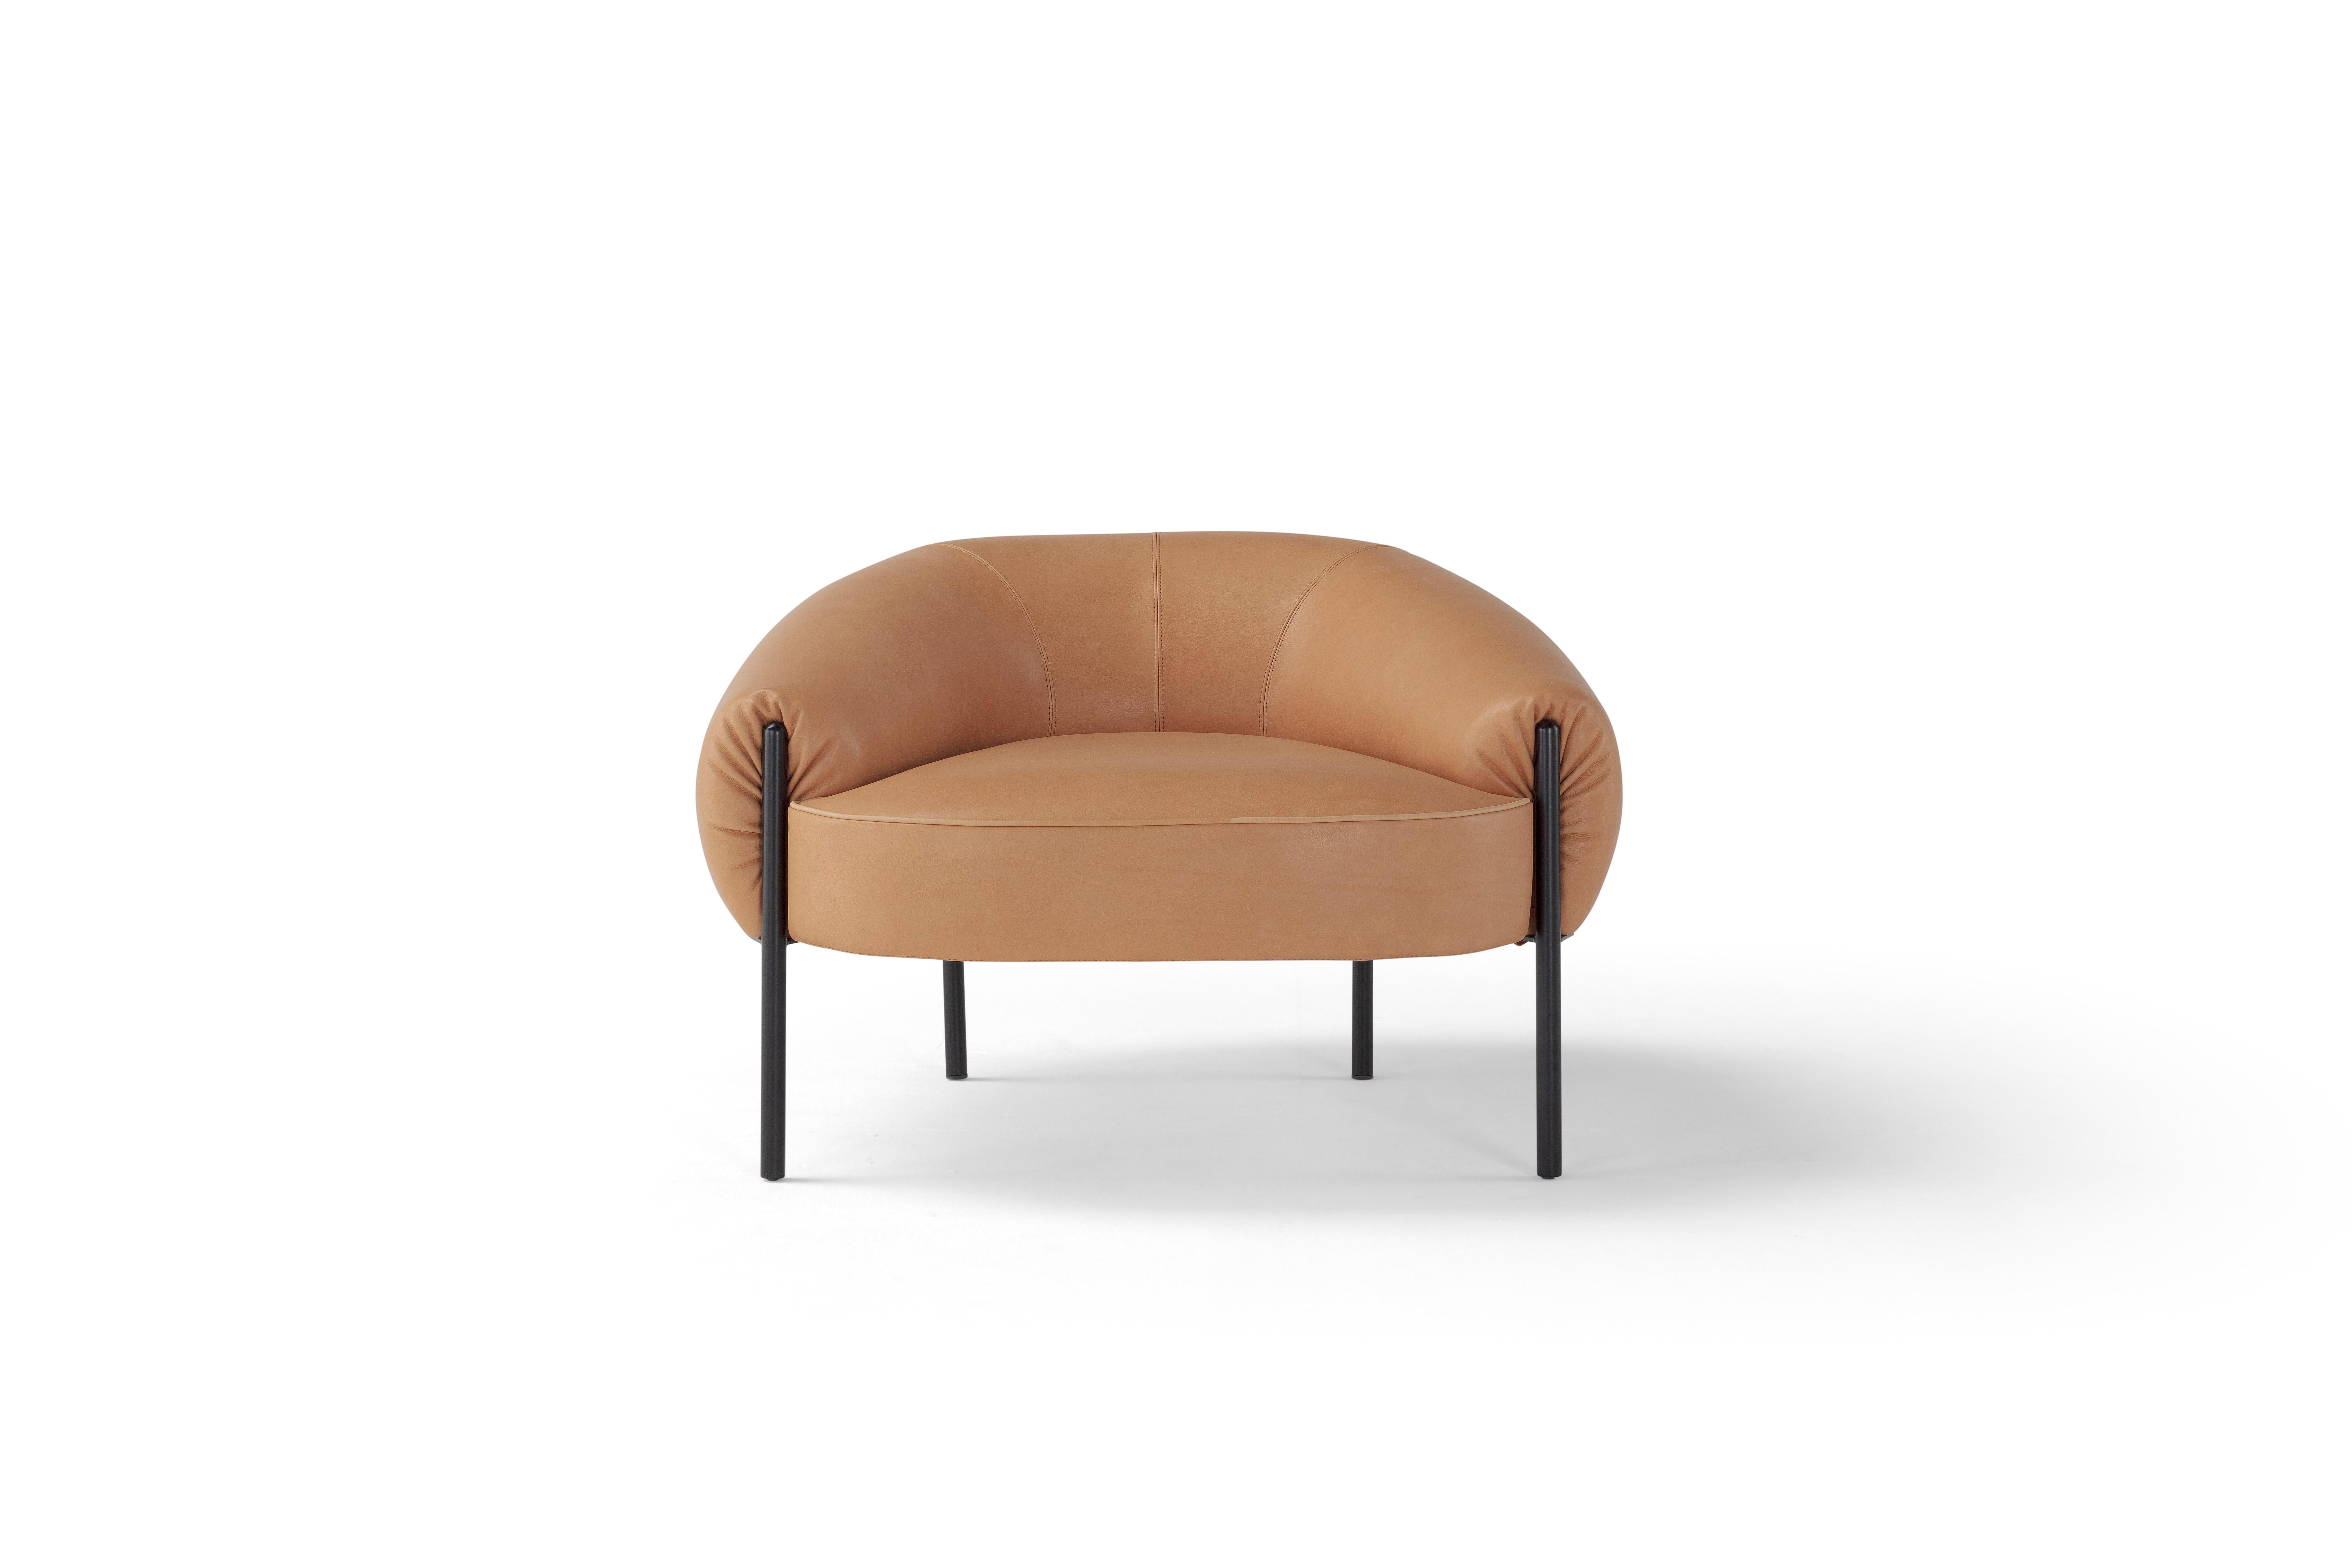 Organic Modern Contemporary Armchair 'Isola' by Amura Lab, Daino 01 For Sale